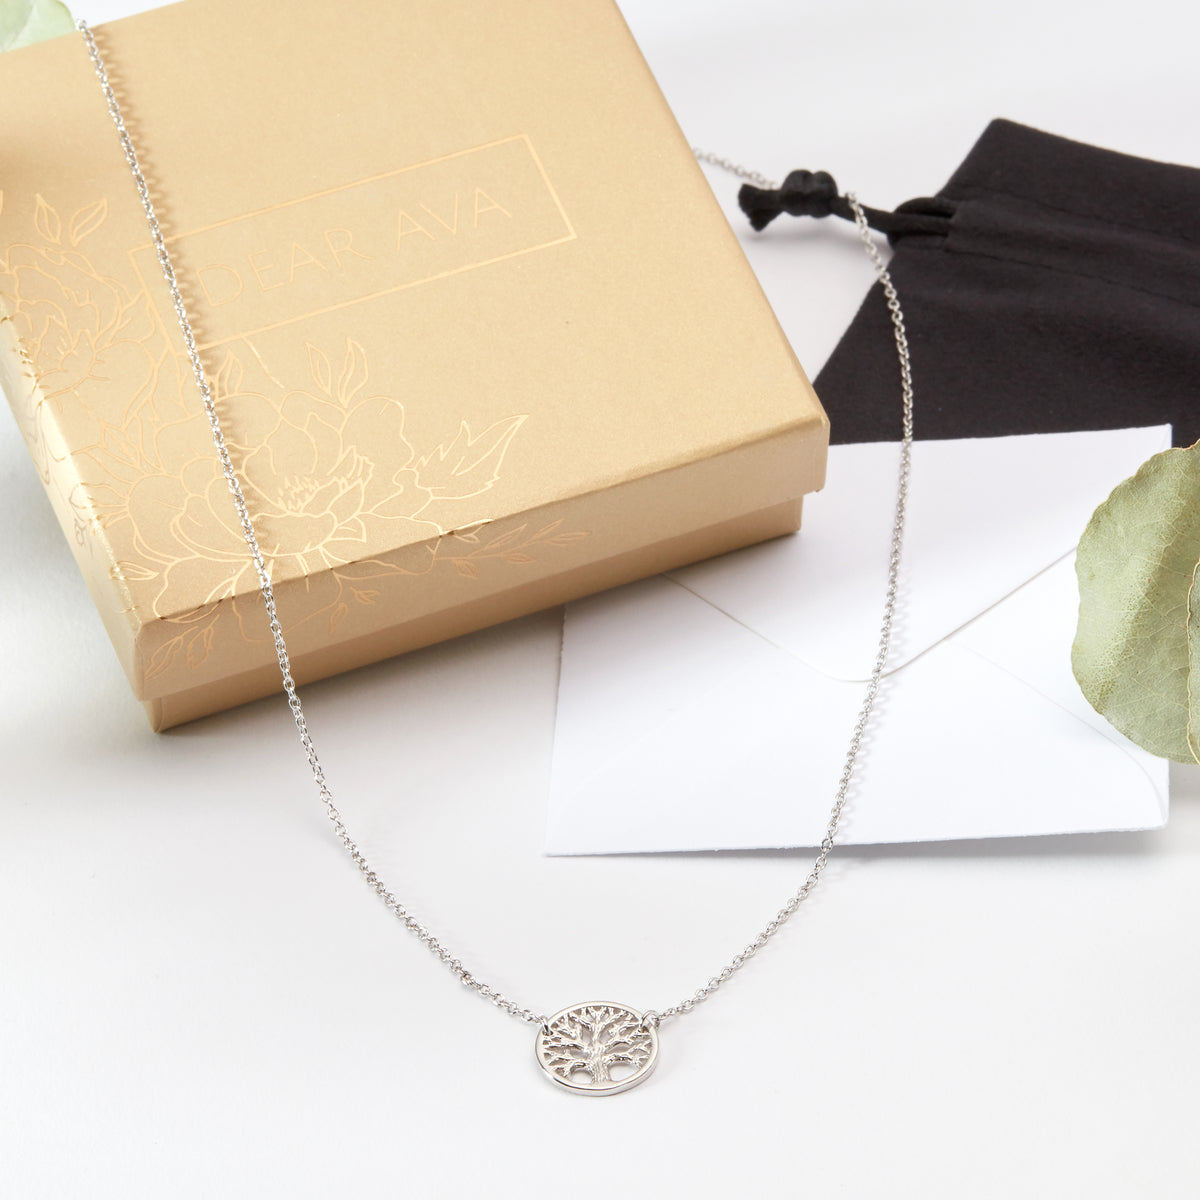 Christmas Gift for Best Friend Necklace